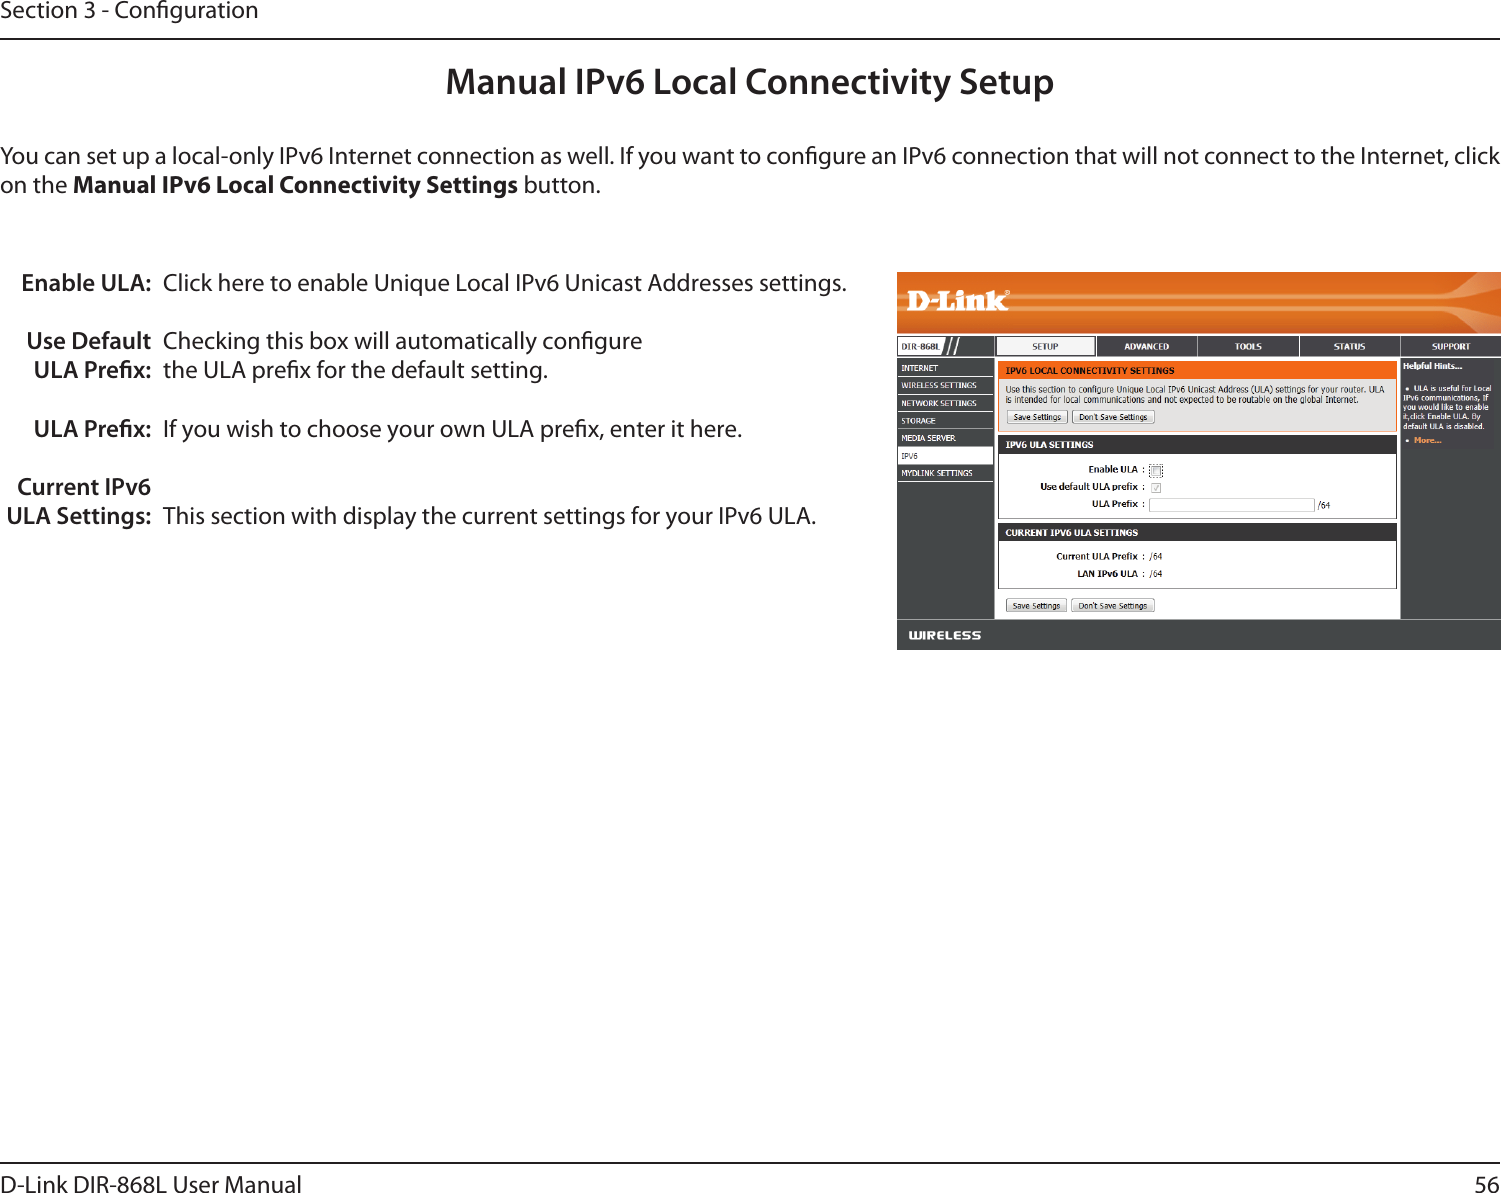 56D-Link DIR-868L User ManualSection 3 - CongurationManual IPv6 Local Connectivity SetupYou can set up a local-only IPv6 Internet connection as well. If you want to congure an IPv6 connection that will not connect to the Internet, click on the Manual IPv6 Local Connectivity Settings button.Enable ULA:Use Default ULA Prex:ULA Prex:Current IPv6 ULA Settings:Click here to enable Unique Local IPv6 Unicast Addresses settings.Checking this box will automatically congure the ULA prex for the default setting.If you wish to choose your own ULA prex, enter it here.This section with display the current settings for your IPv6 ULA.